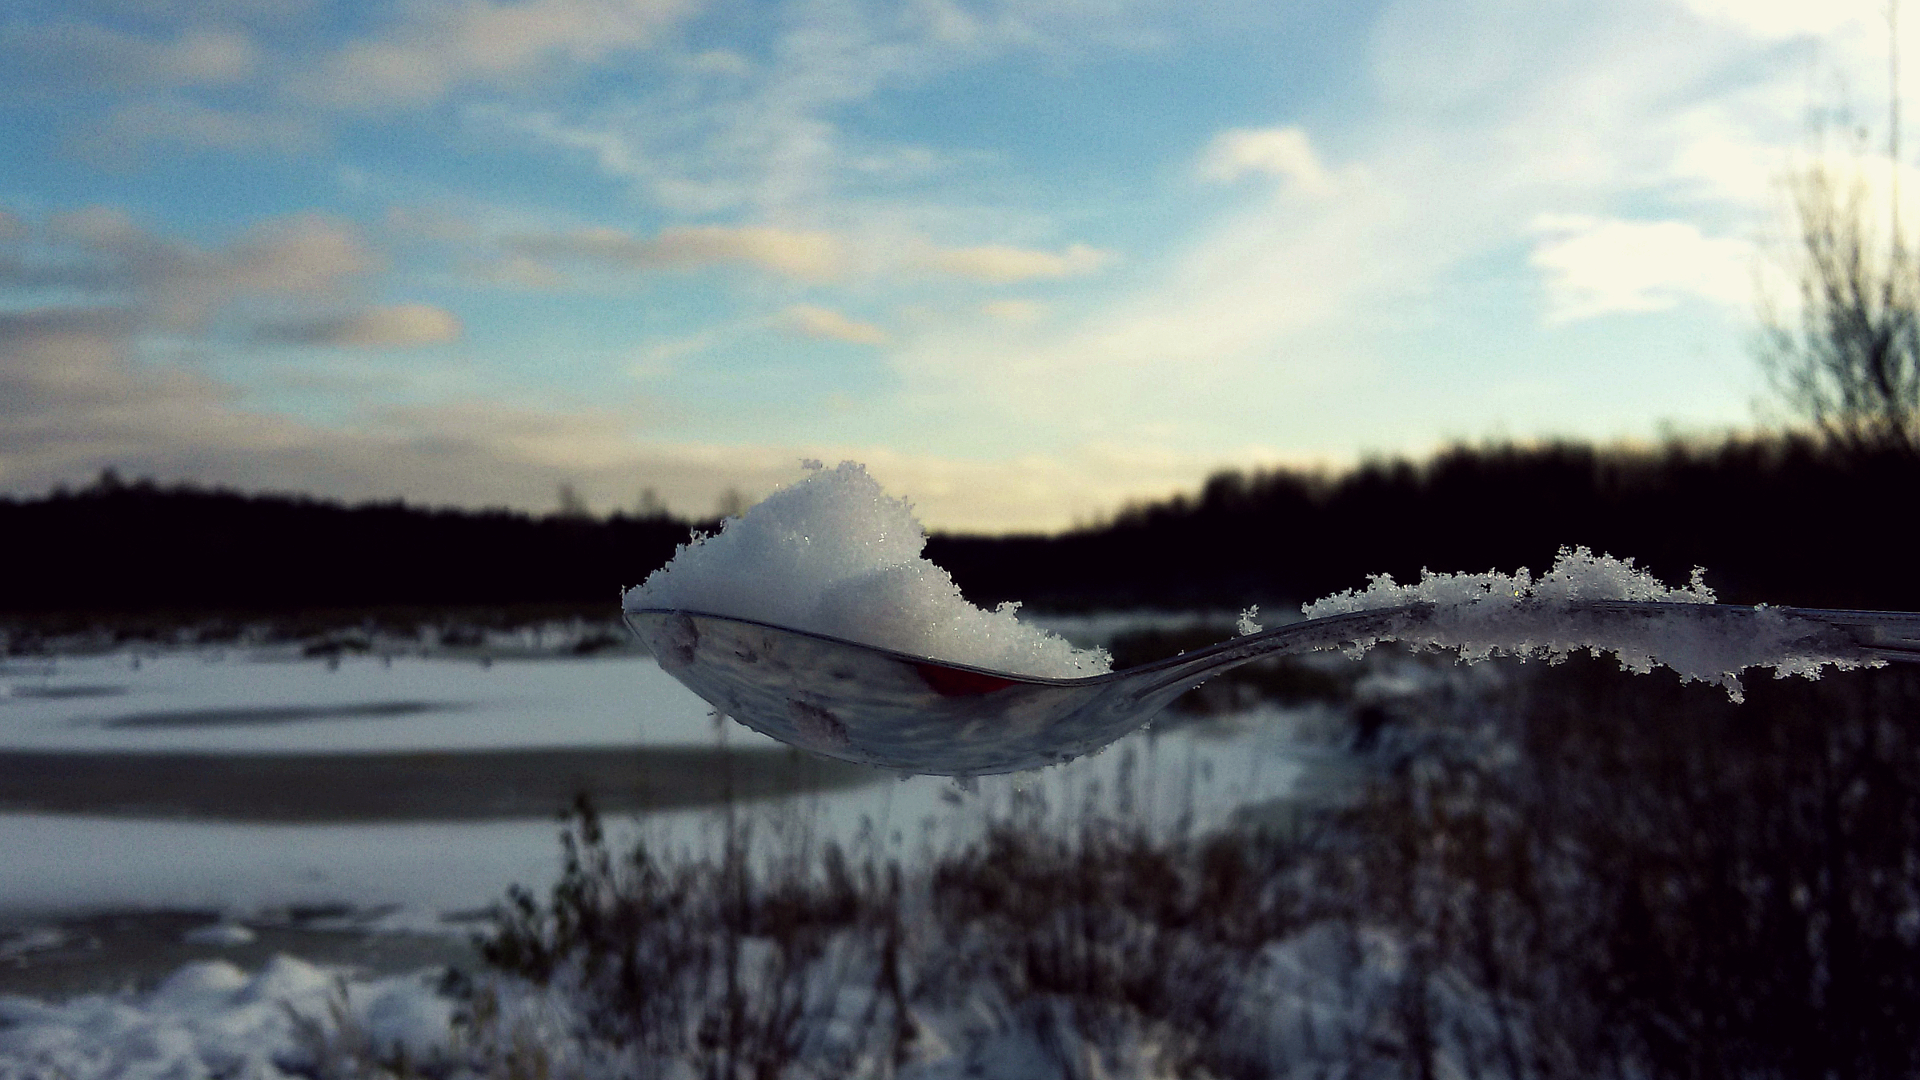 General 1920x1080 spoon snow winter cold outdoors landscape sky